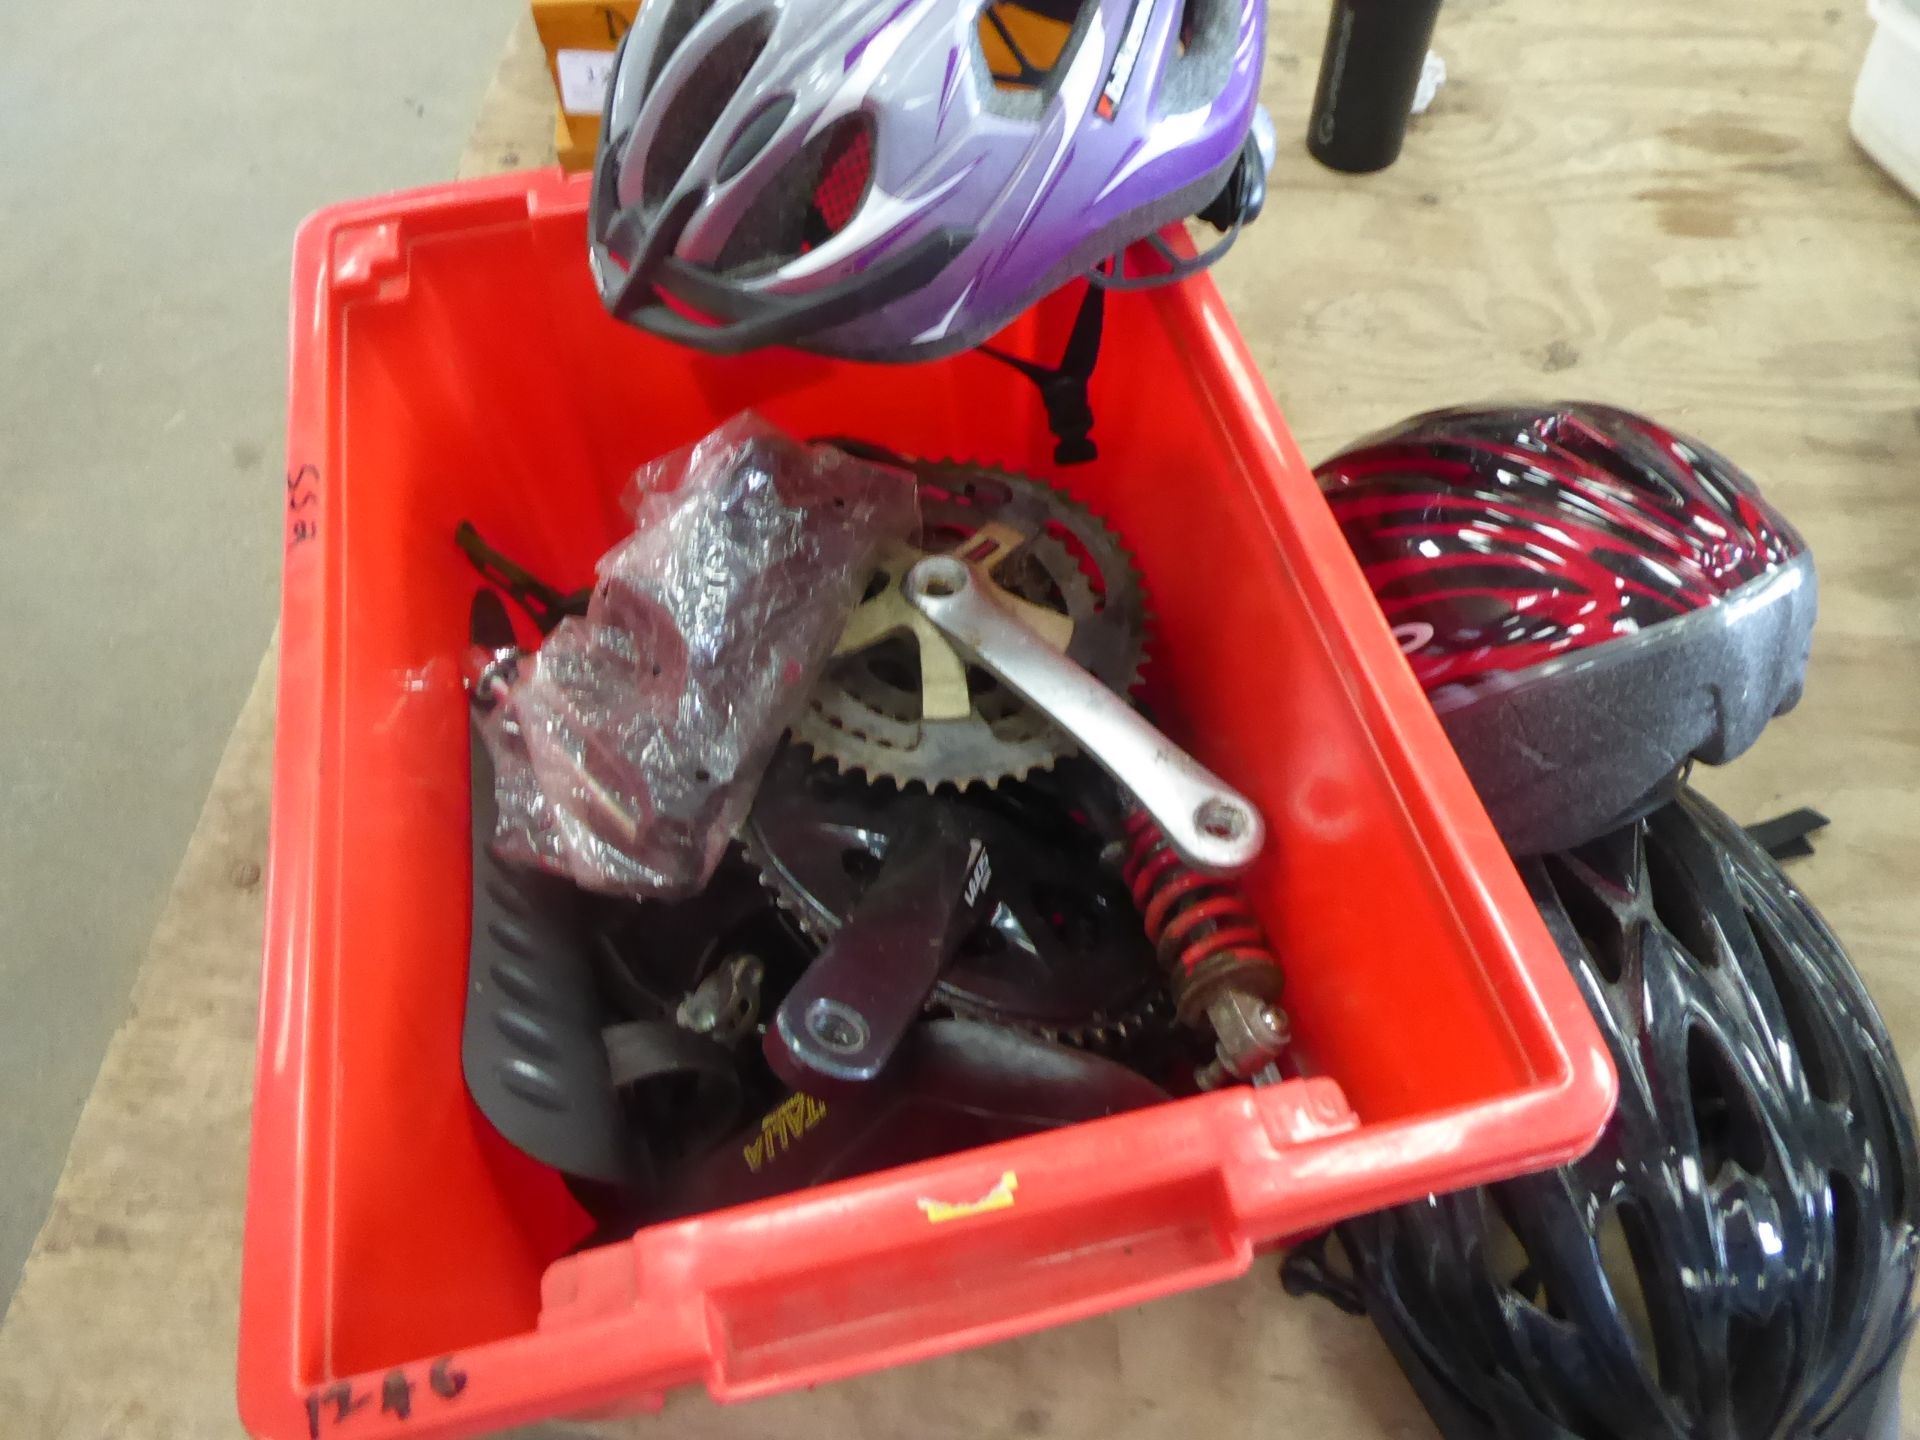 Quantity of cycle helmets and cycle parts